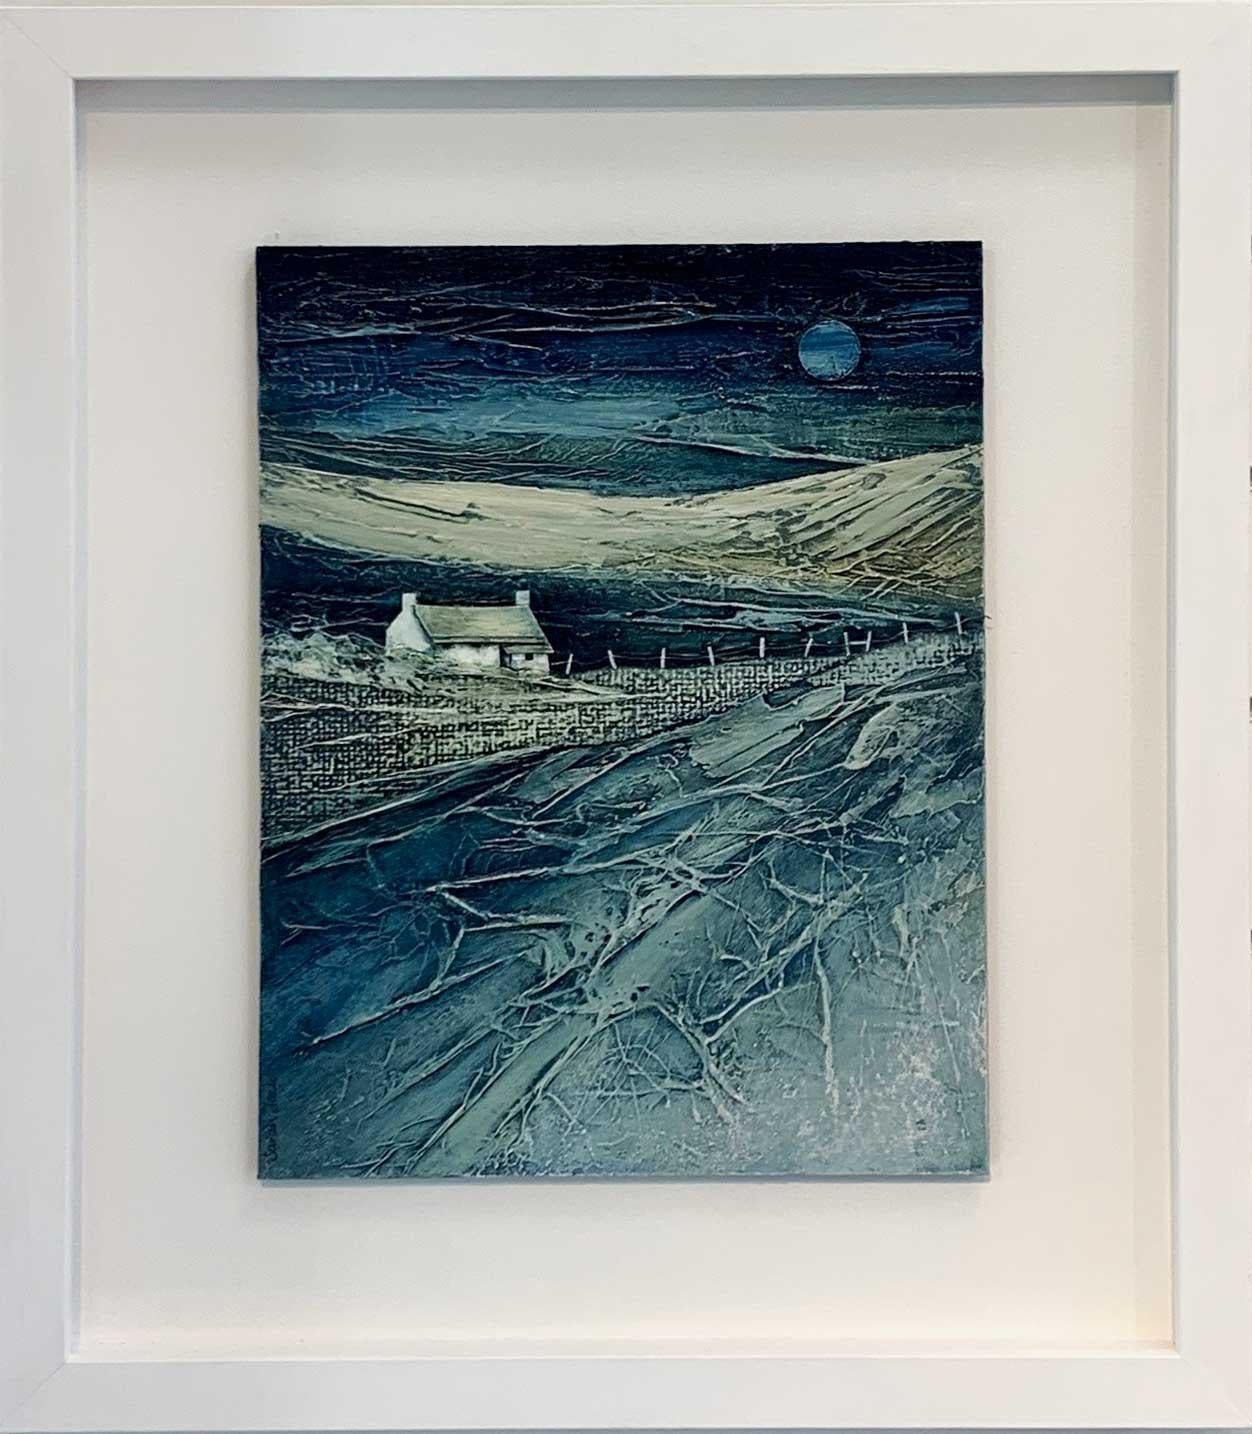 Peace at Last - Contemporary Rural Landscape: Framed Mixed Media  - Gray Landscape Painting by Sarah Jack